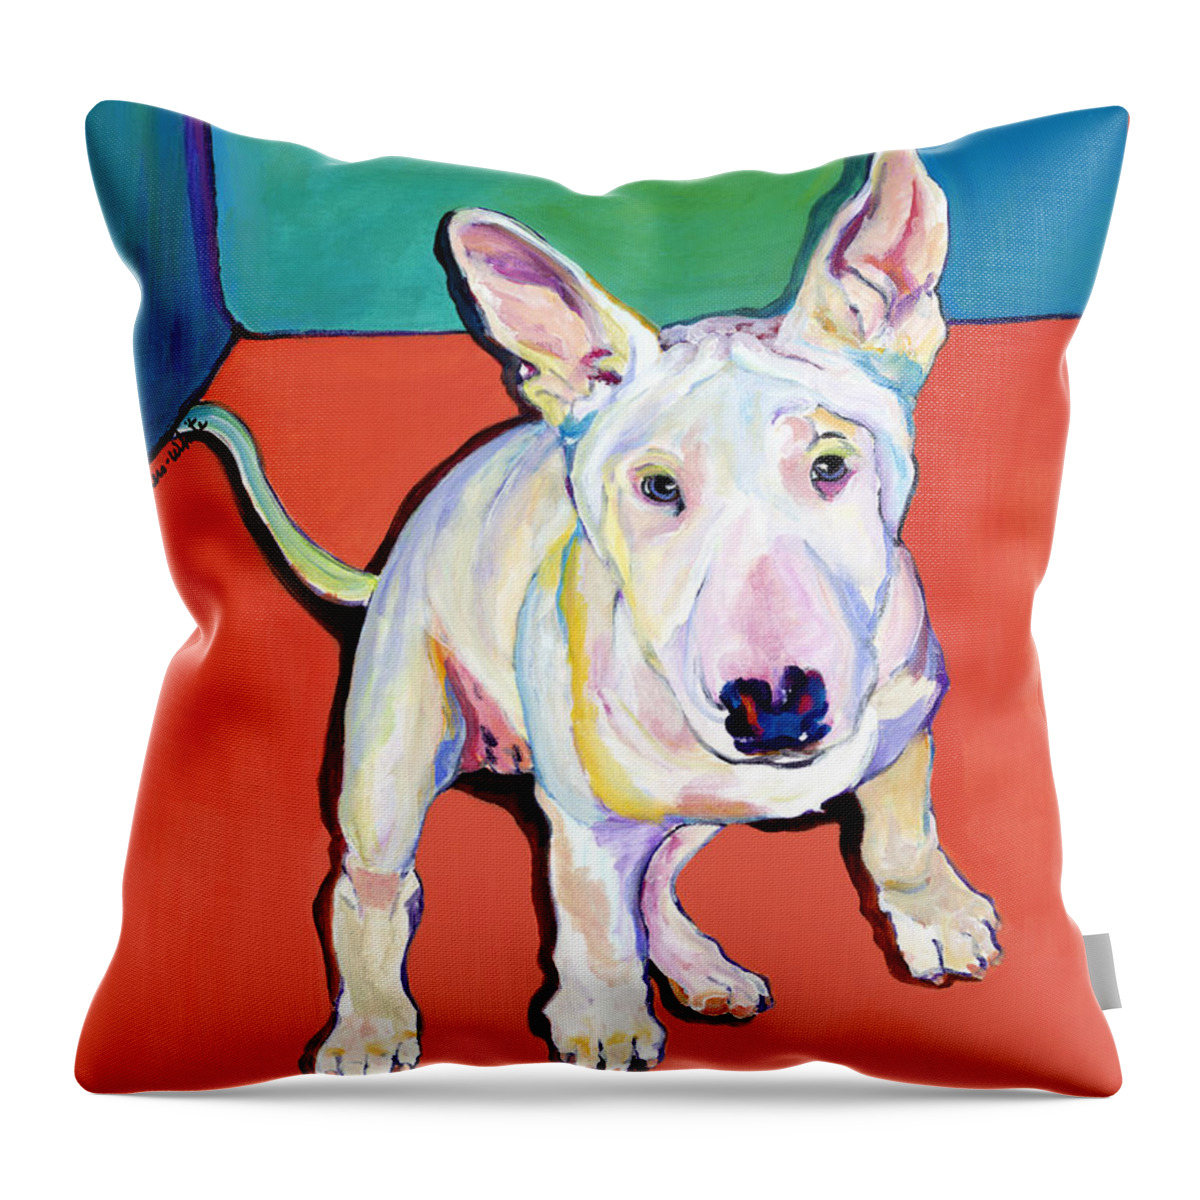 Pet Portrait Commissions Throw Pillow featuring the painting Pearl by Pat Saunders-White